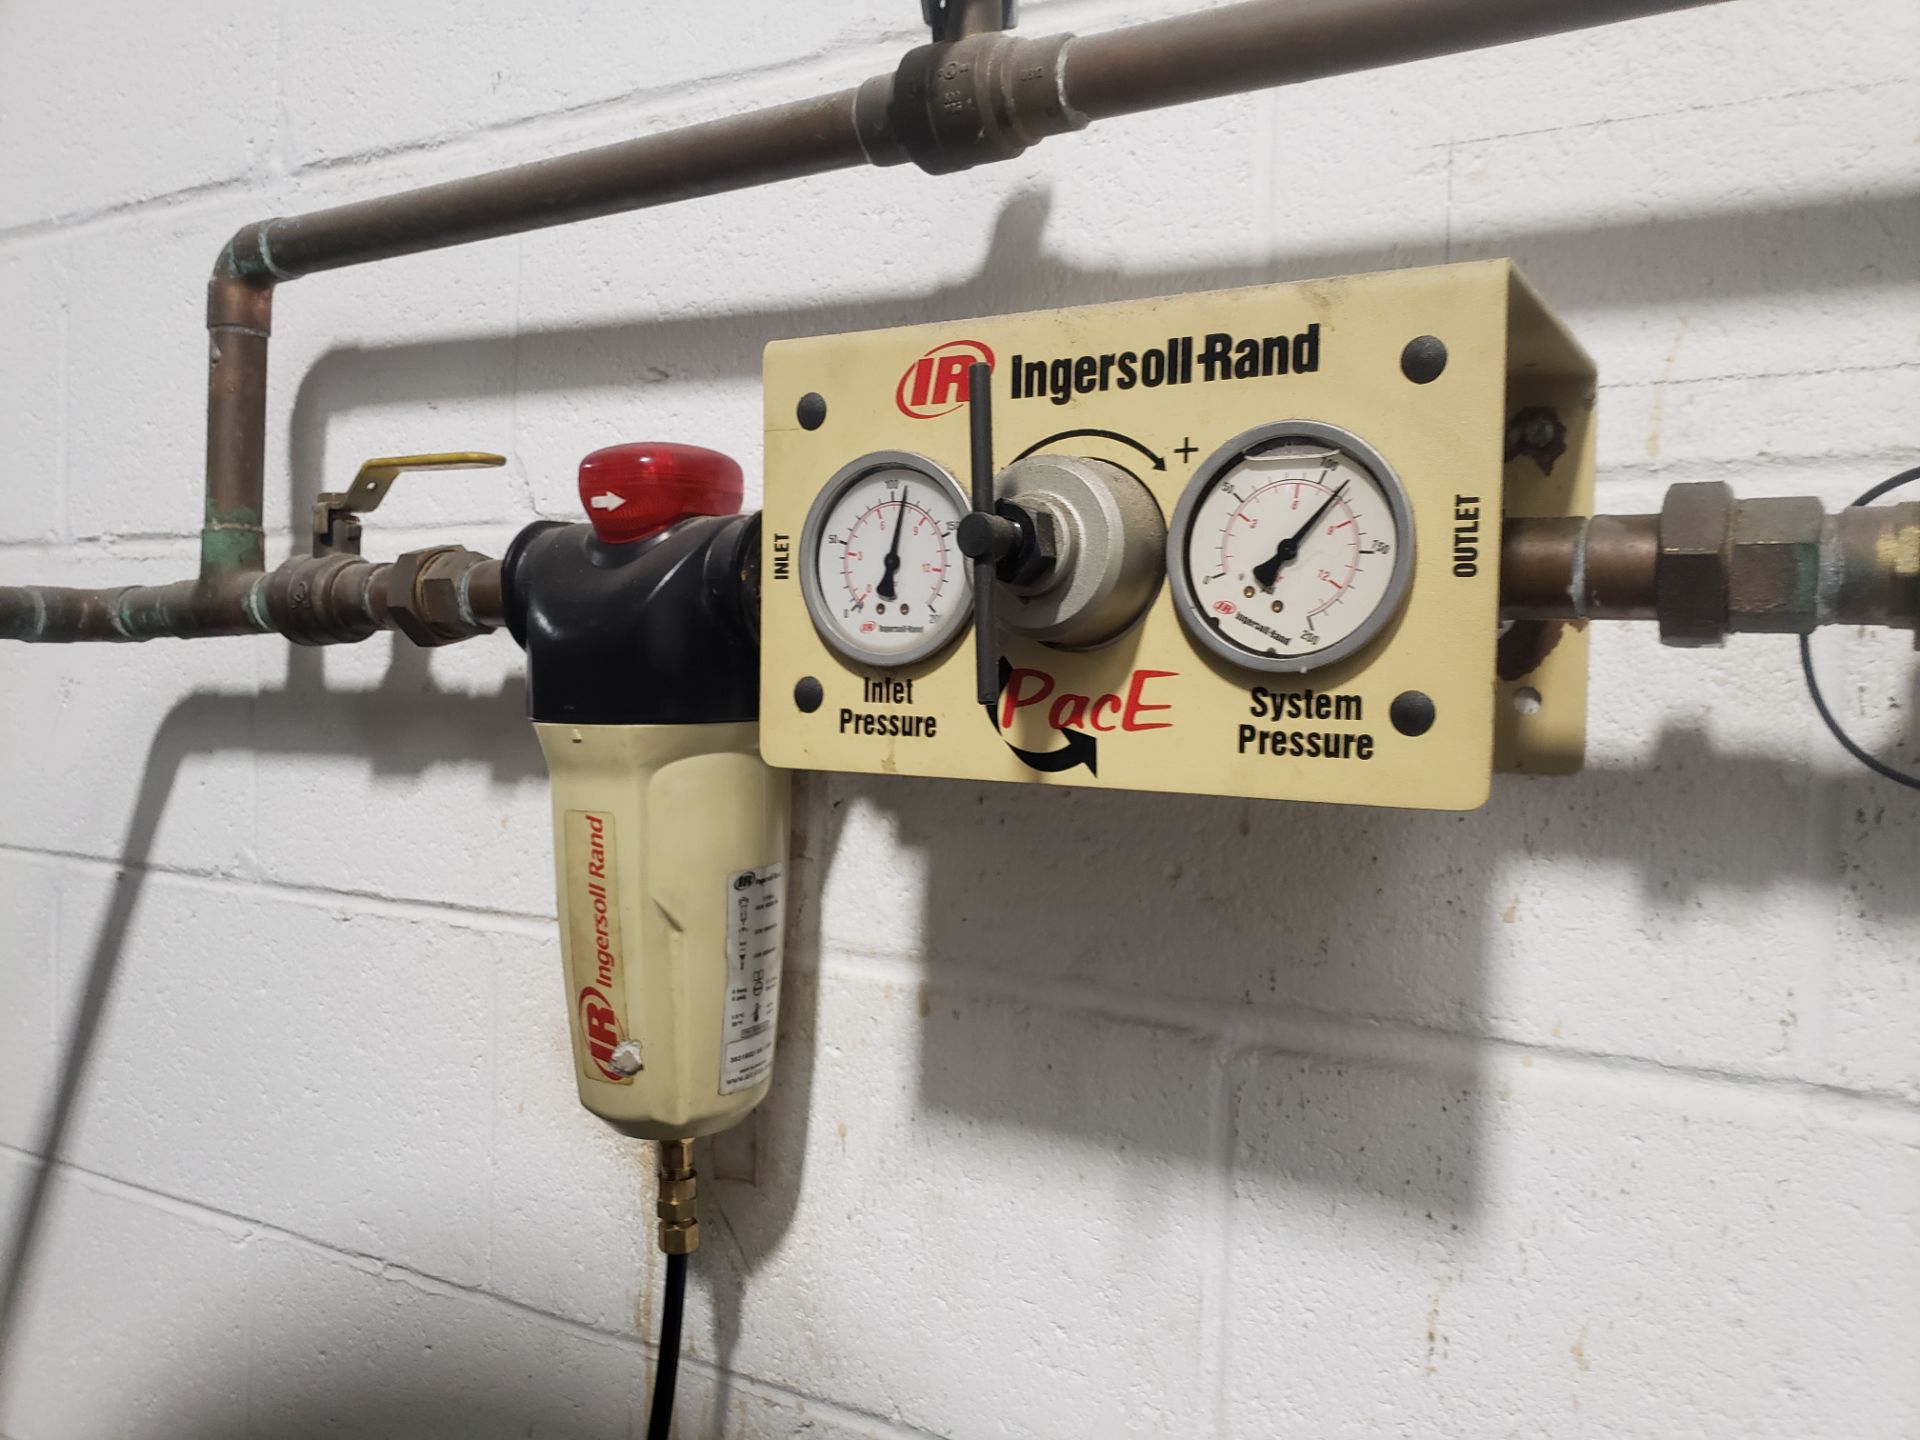 Ingersoll-Rand modle SSR-EP25 Air Compressor, 97 CFM, 125 psi located Worcester, MA - Image 4 of 8